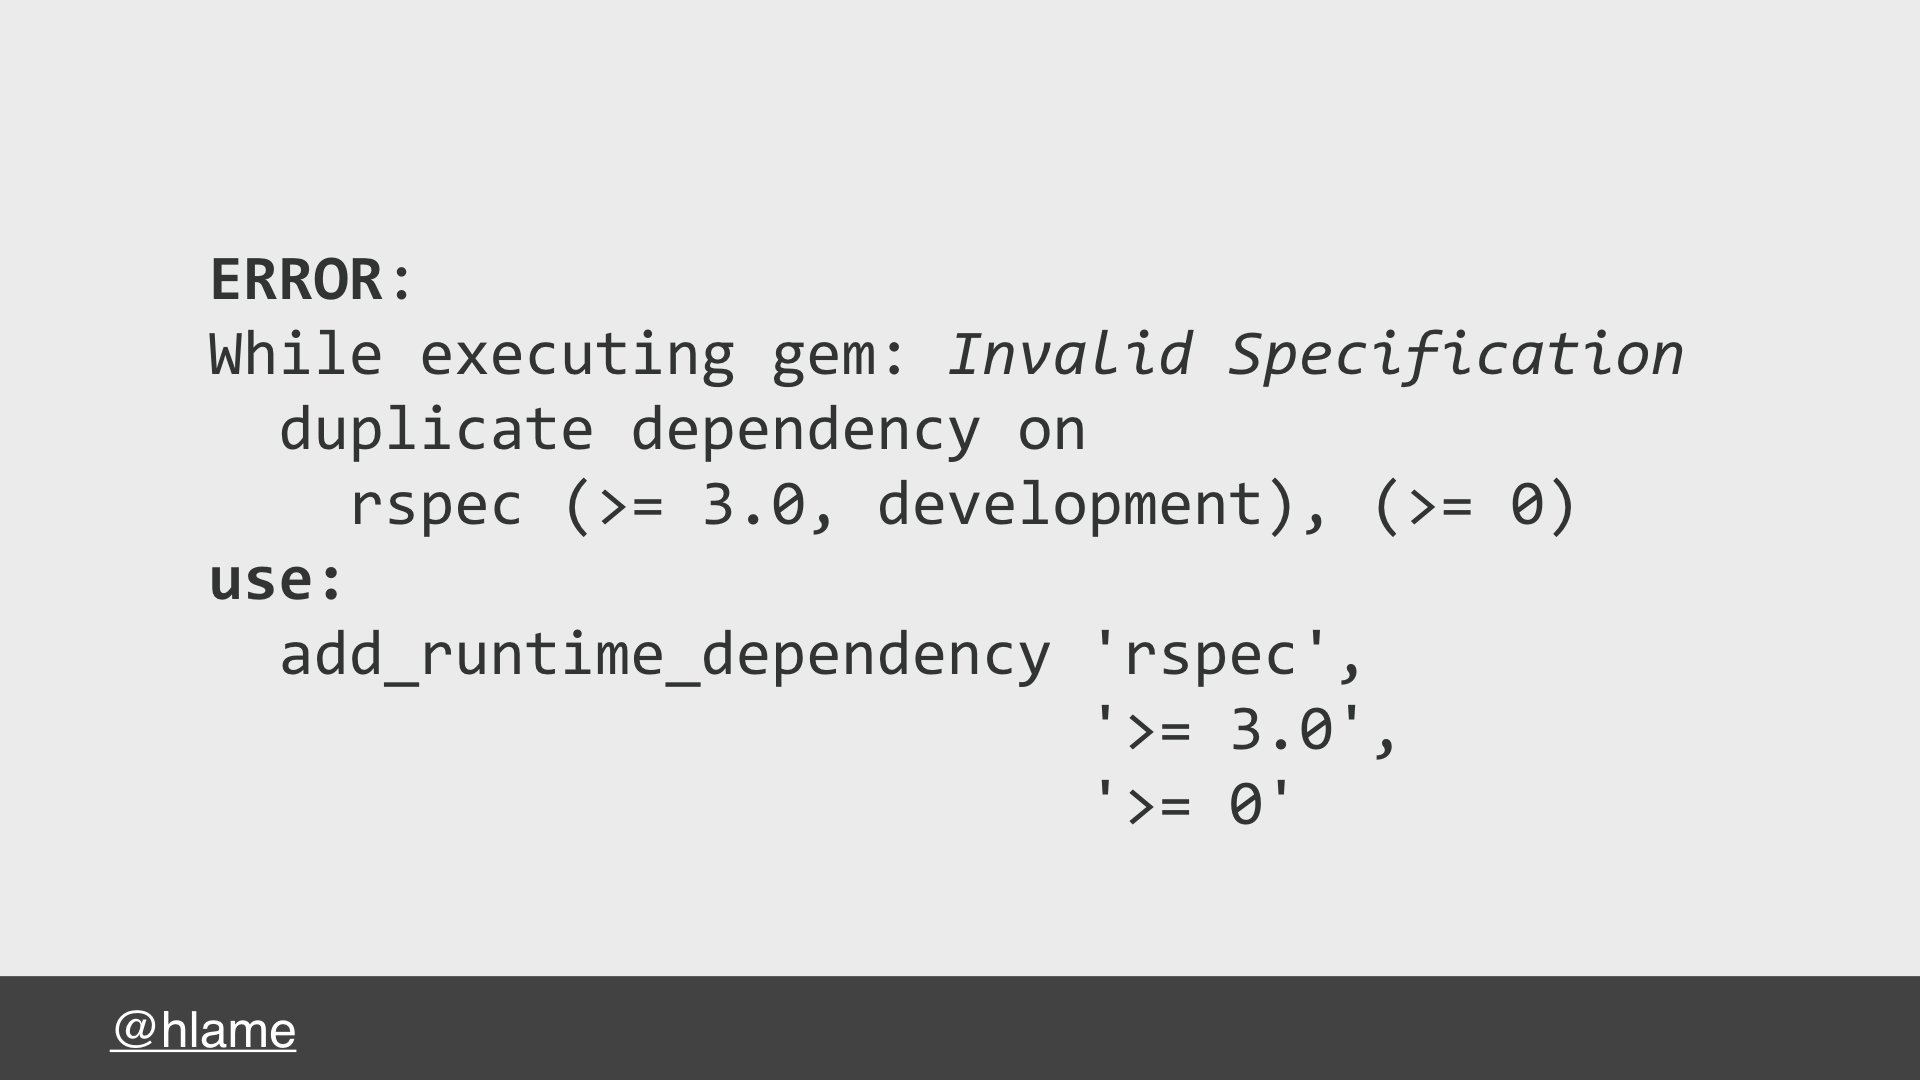 An error message from rubygems about dependencies - text: ERROR: While executing gem: Invalid Specification duplicate dependency on rspec (>= 3.0, development), (>= 0) use: add_runtime_dependency 'rspec', '>= 3.0', '>= 0'